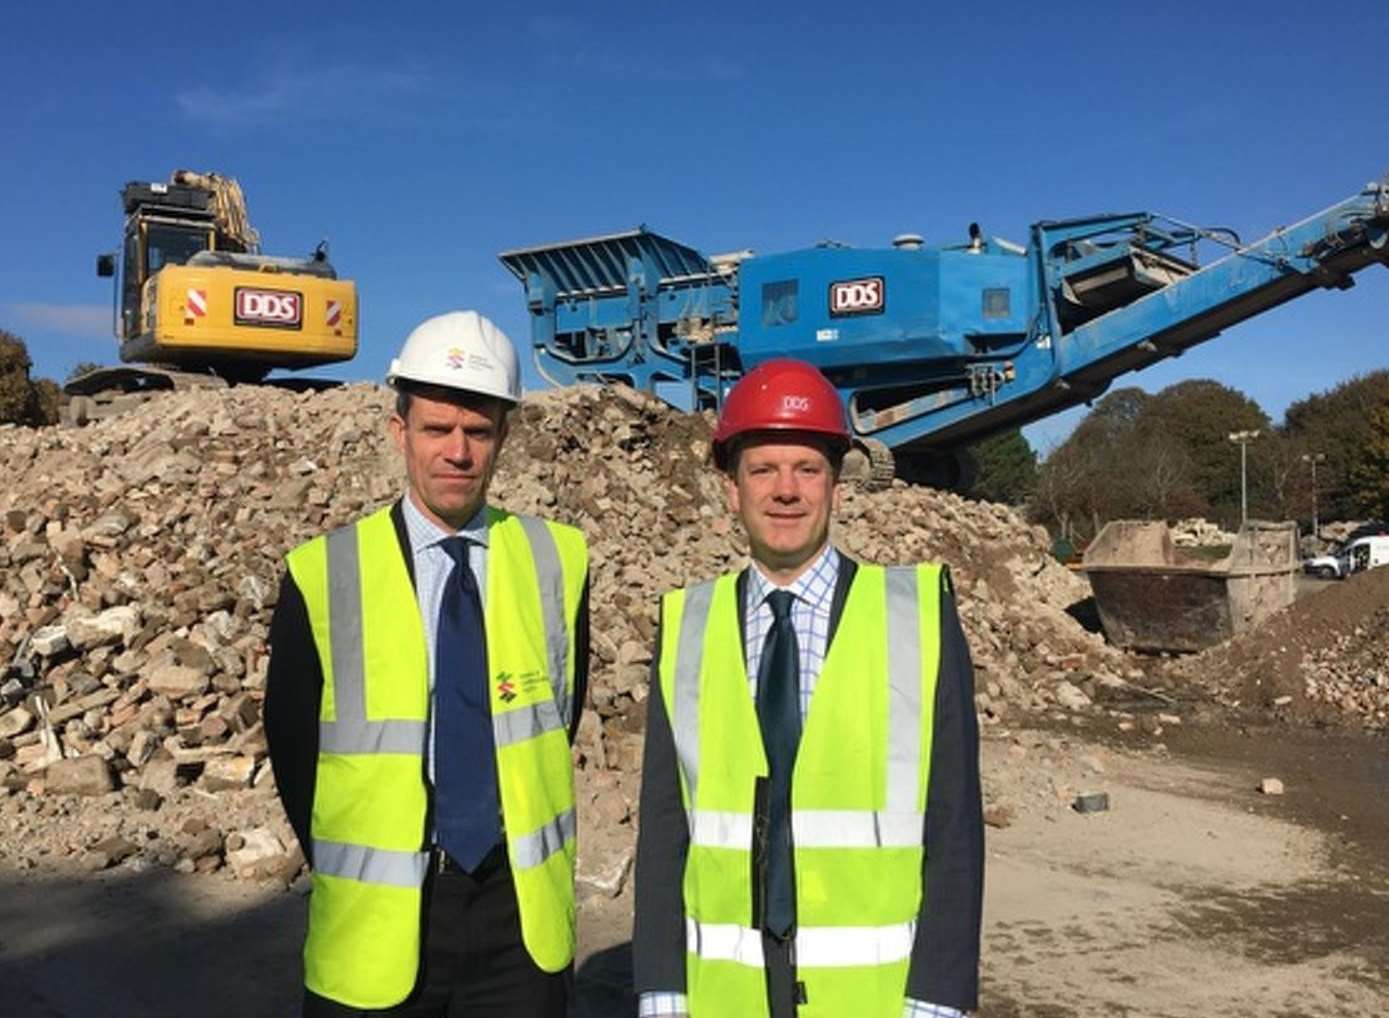 MP Charlie Elphicke with DDS Demolition at Connaught Barracks